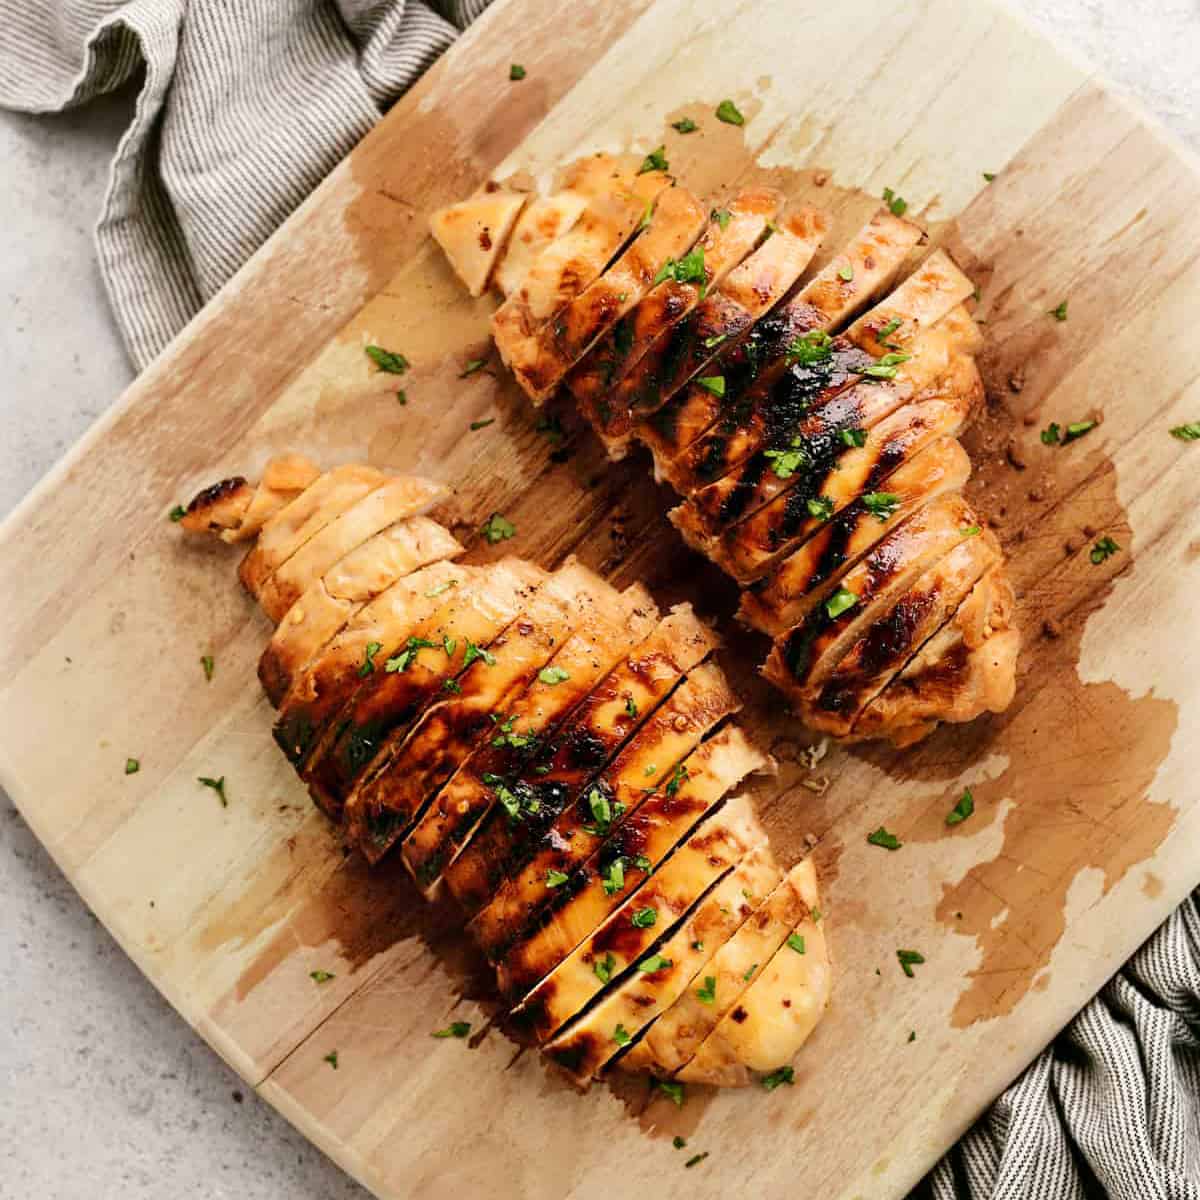 sliced chicken breasts on a wood cutting board.